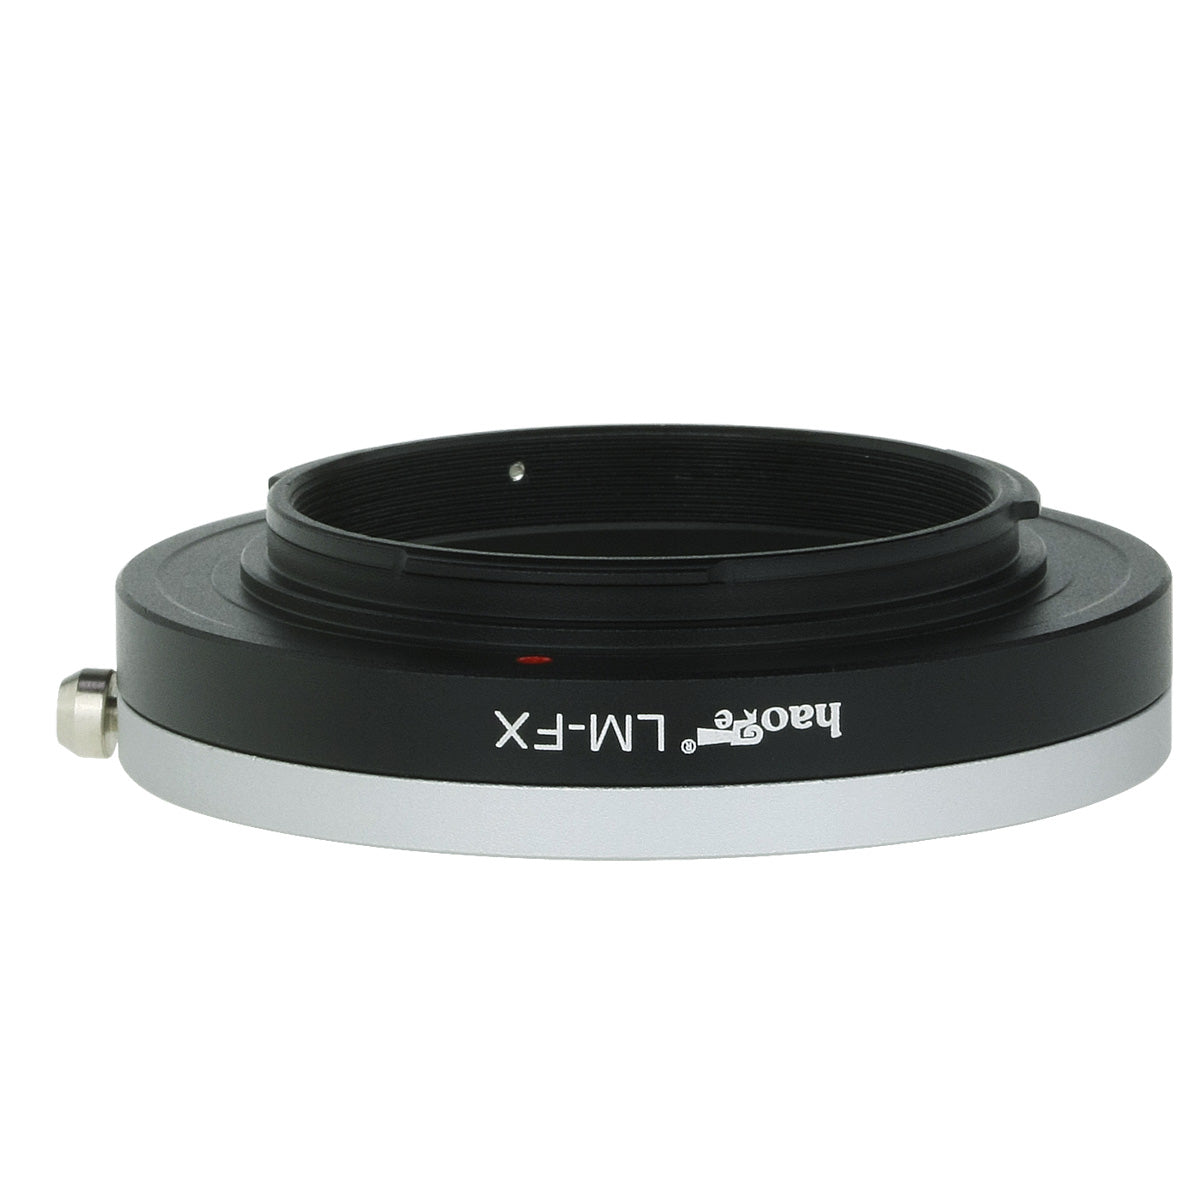 Haoge Lens Mount Adapter for Leica M mount Lens to Fujifilm X-mount Camera such as X-A1, X-A2, X-A3, X-A10, X-E1, X-E2, X-E2s, X-M1, X-Pro1, X-Pro2, X-T1, X-T2, X-T10, X-T20